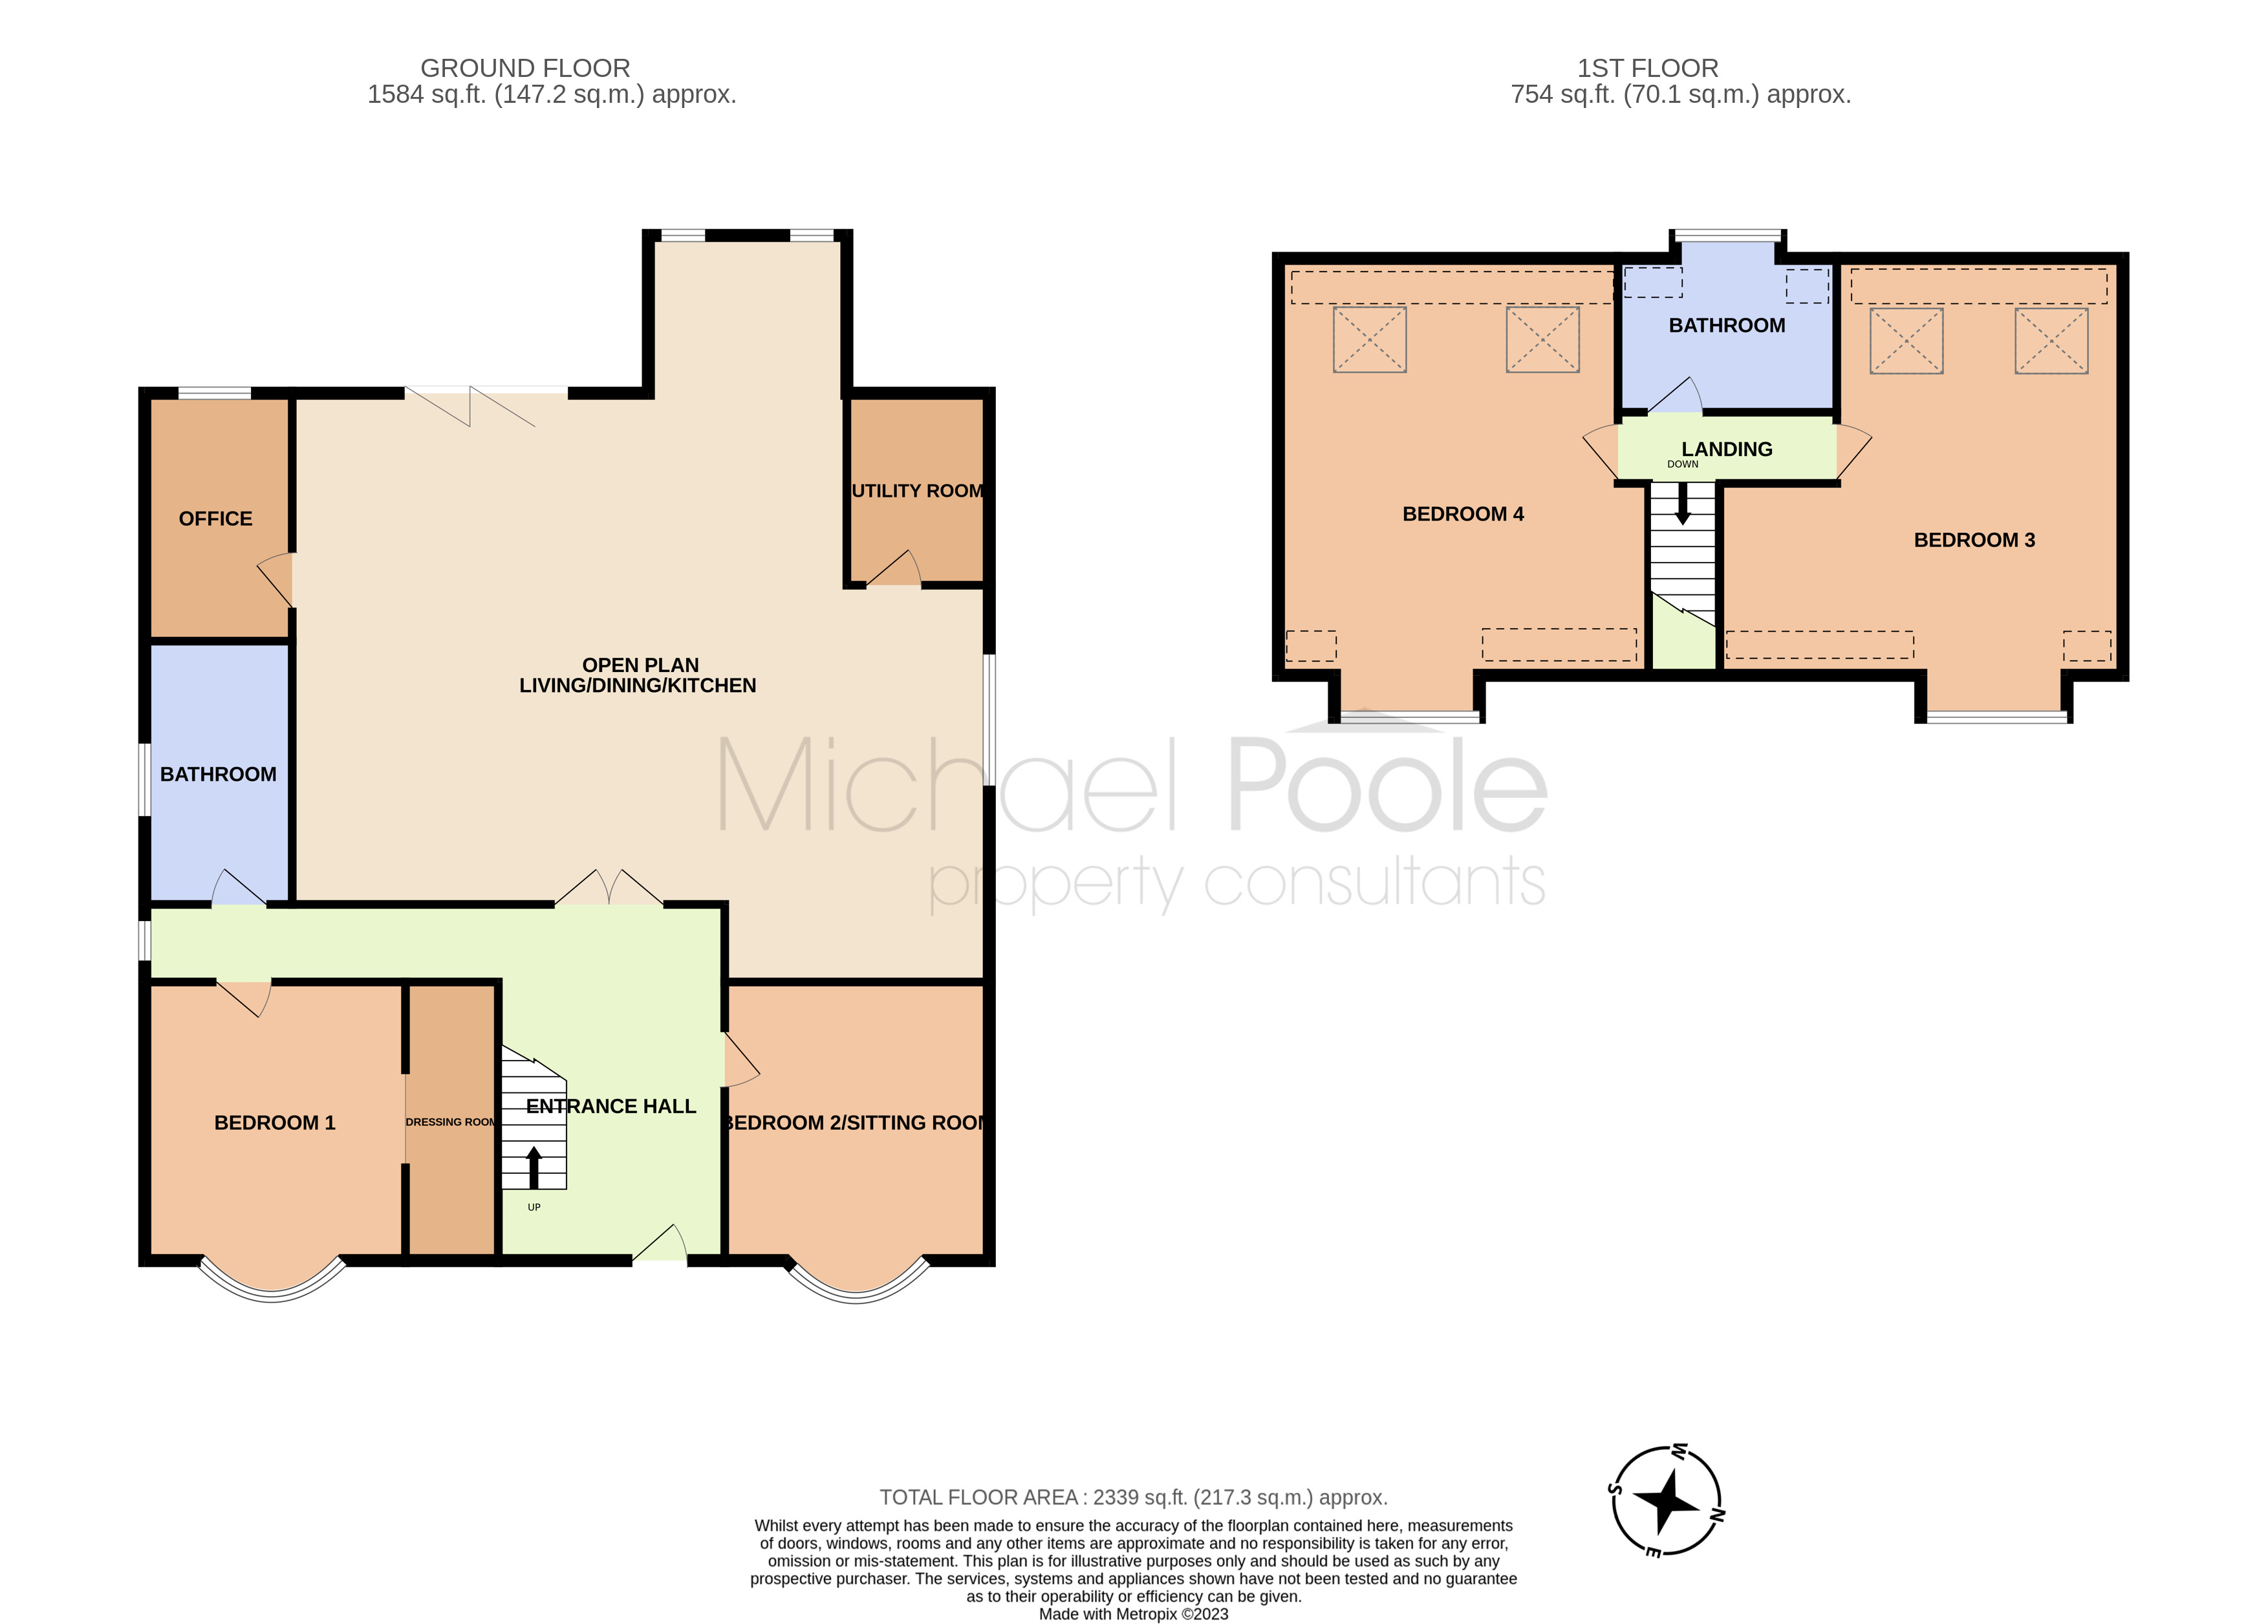 4 bed bungalow for sale in Thornaby Road, Thornaby - Property floorplan